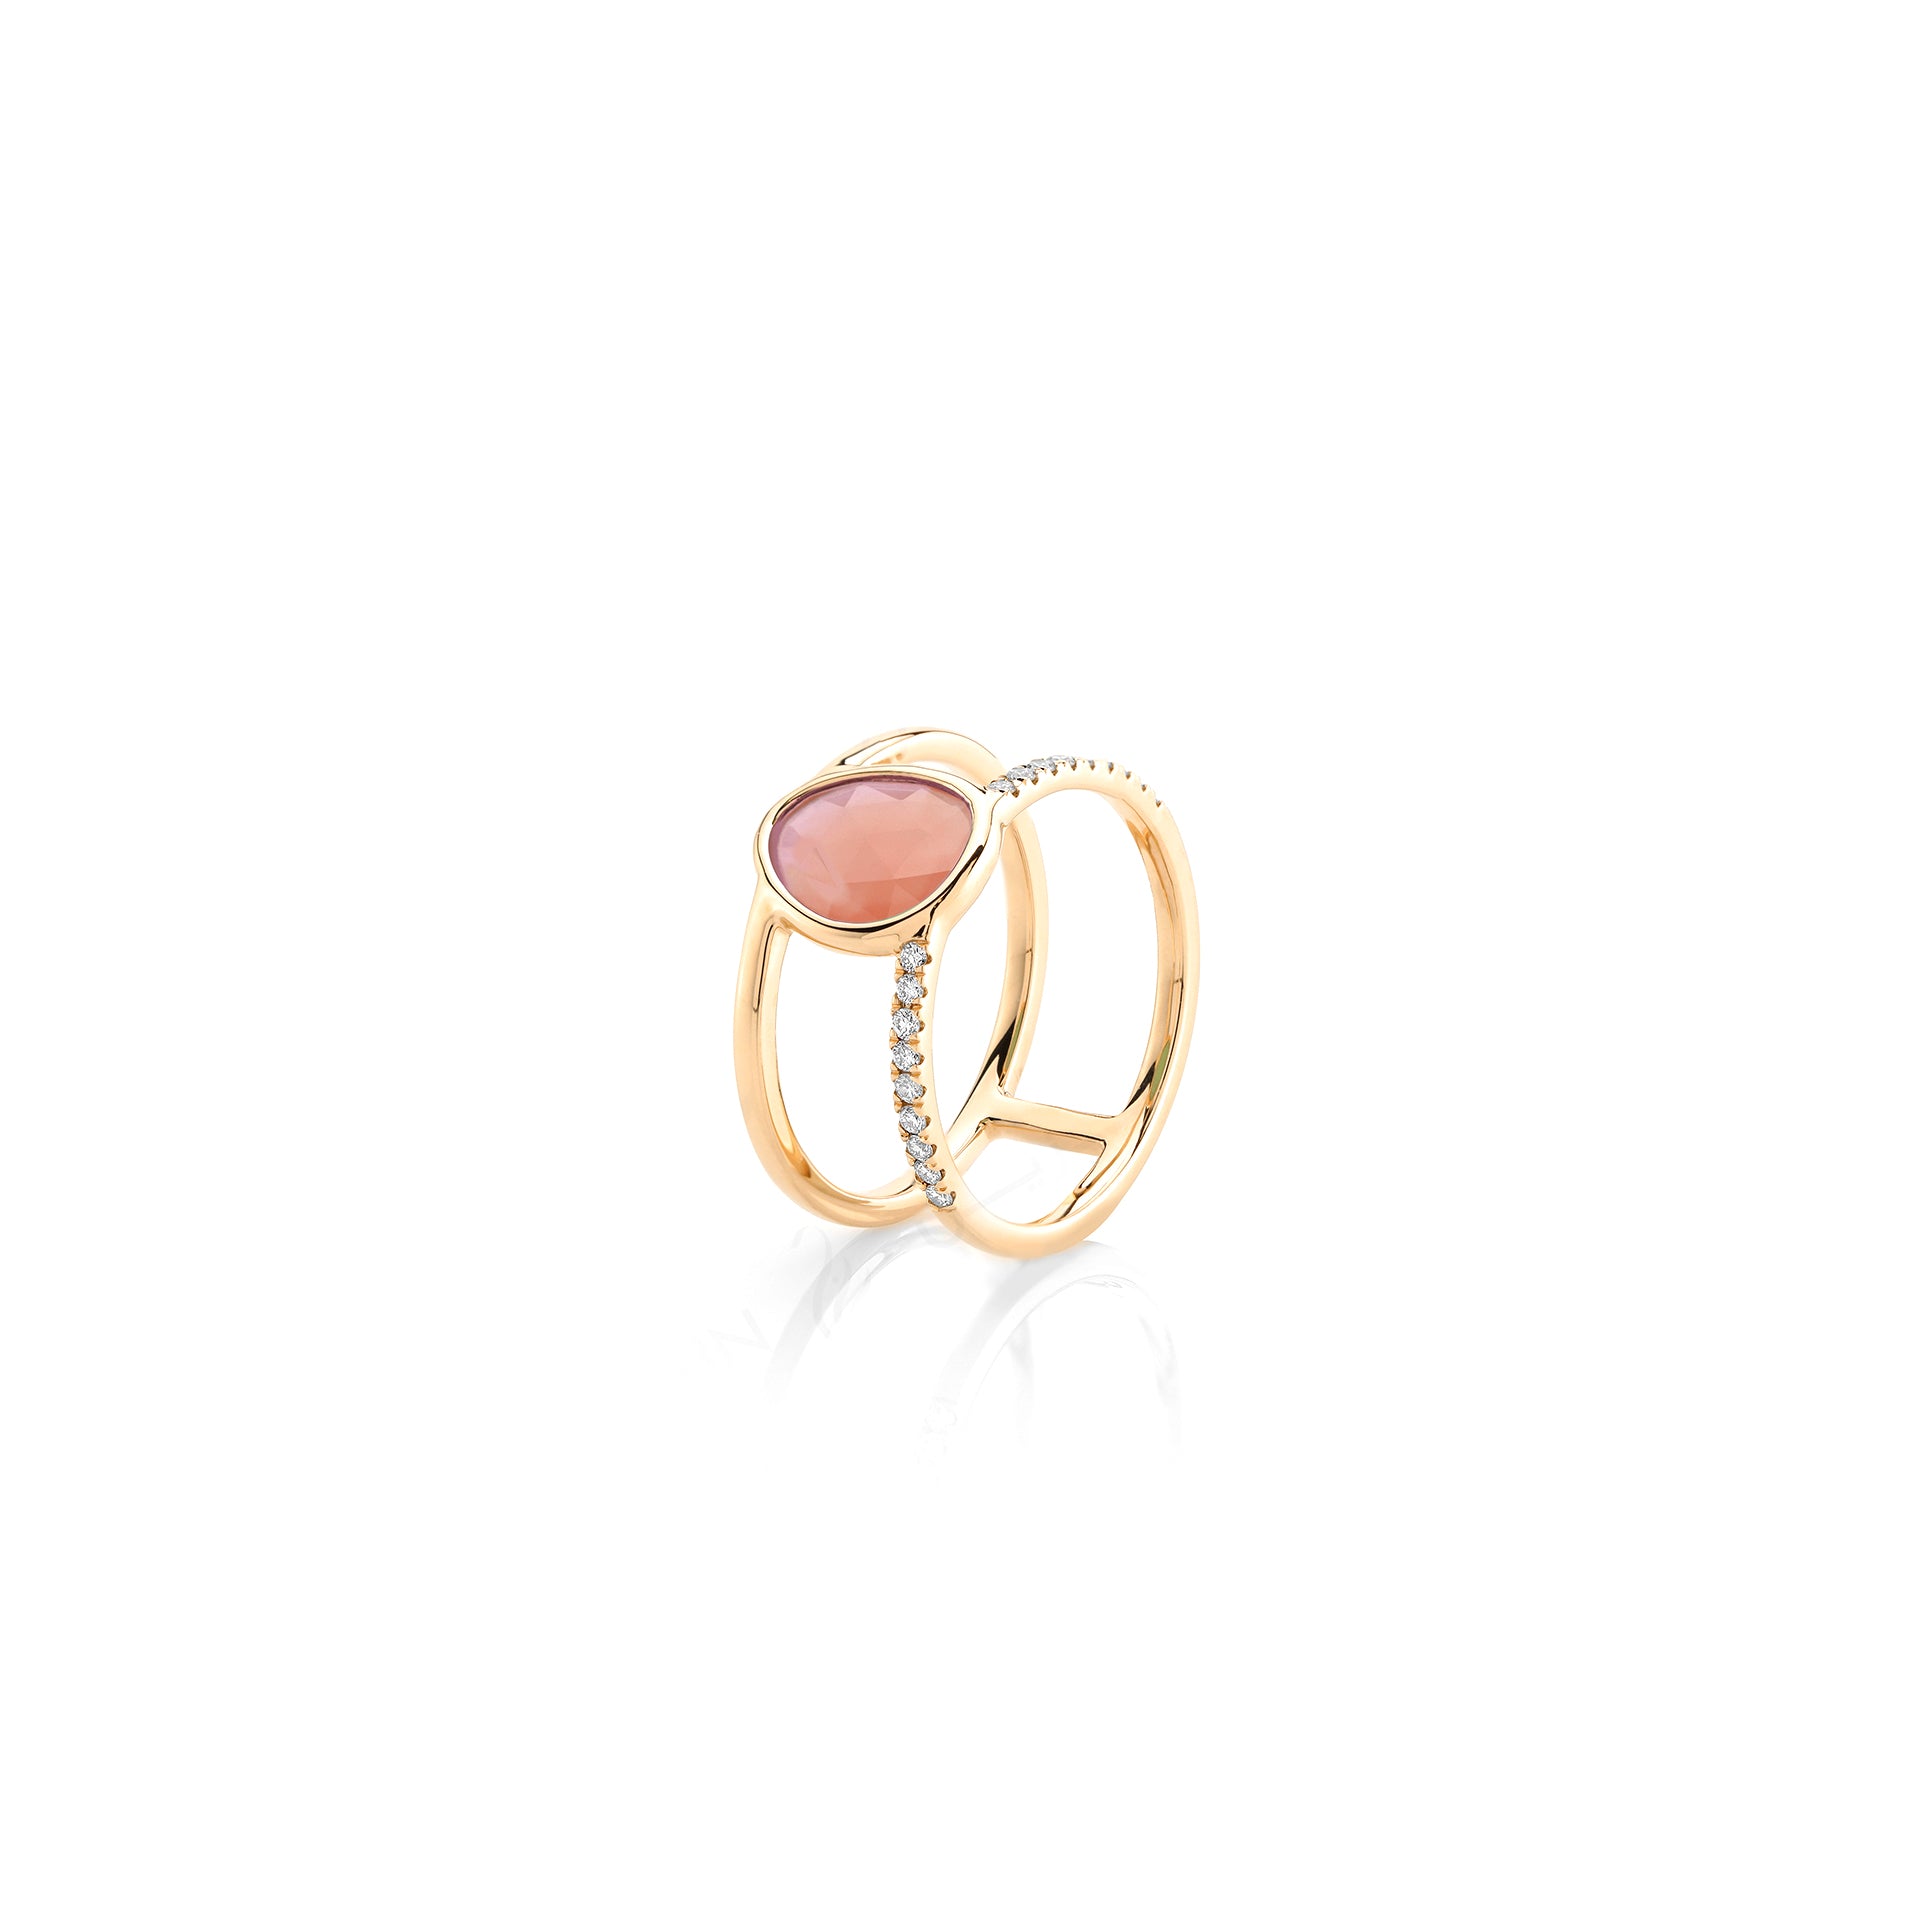 Simply Nina ring in 18k yellow gold with Opal stone and diamonds